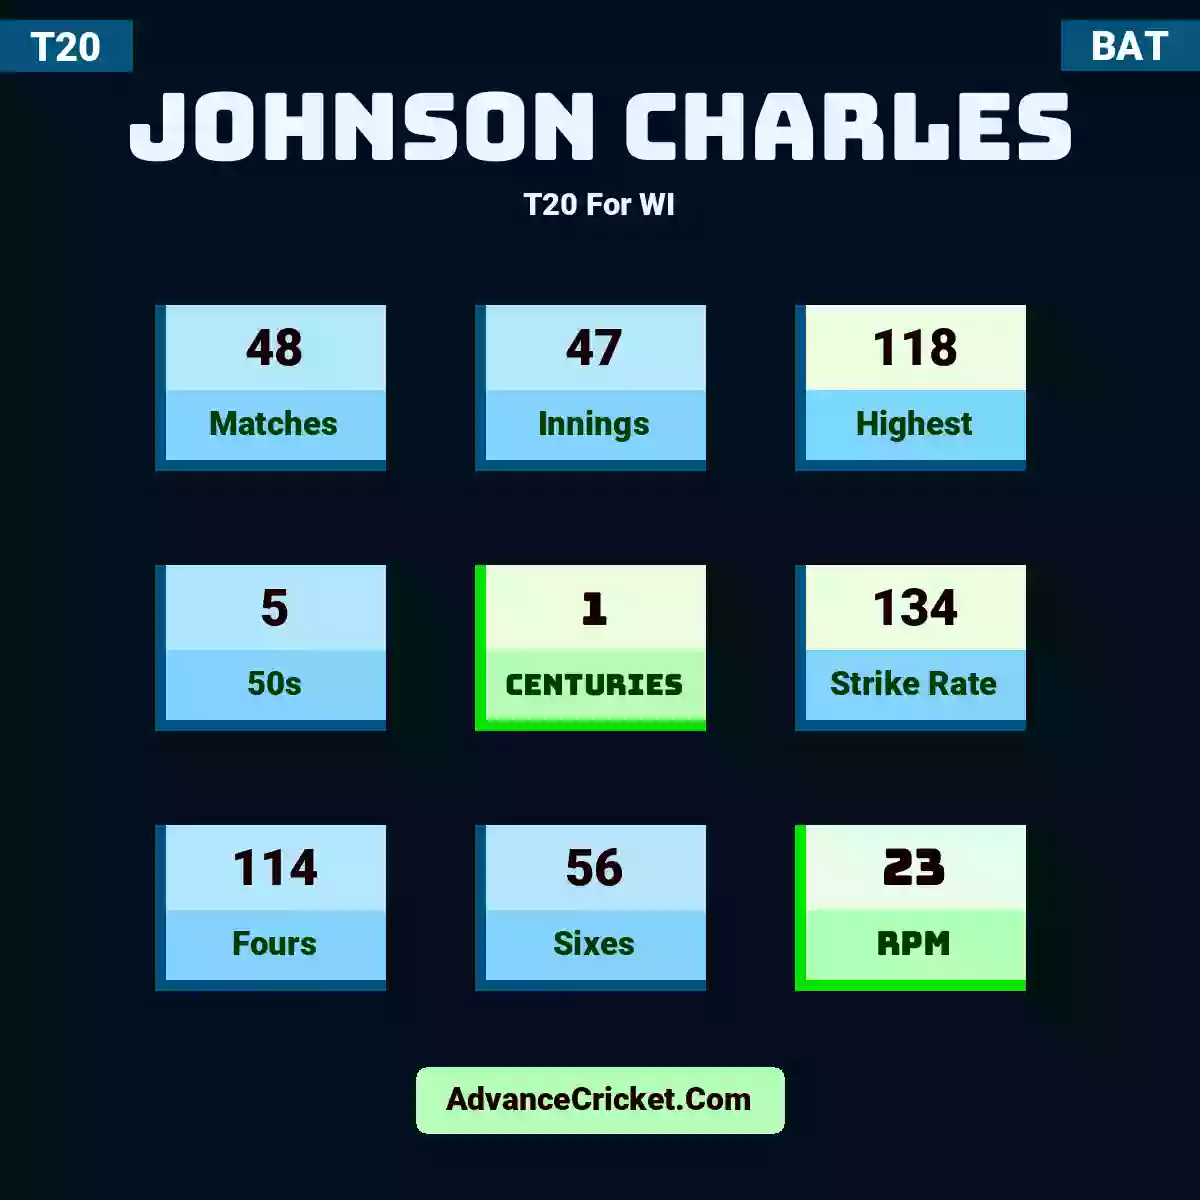 Johnson Charles T20  For WI, Johnson Charles played 48 matches, scored 118 runs as highest, 5 half-centuries, and 1 centuries, with a strike rate of 134. J.Charles hit 114 fours and 56 sixes, with an RPM of 23.